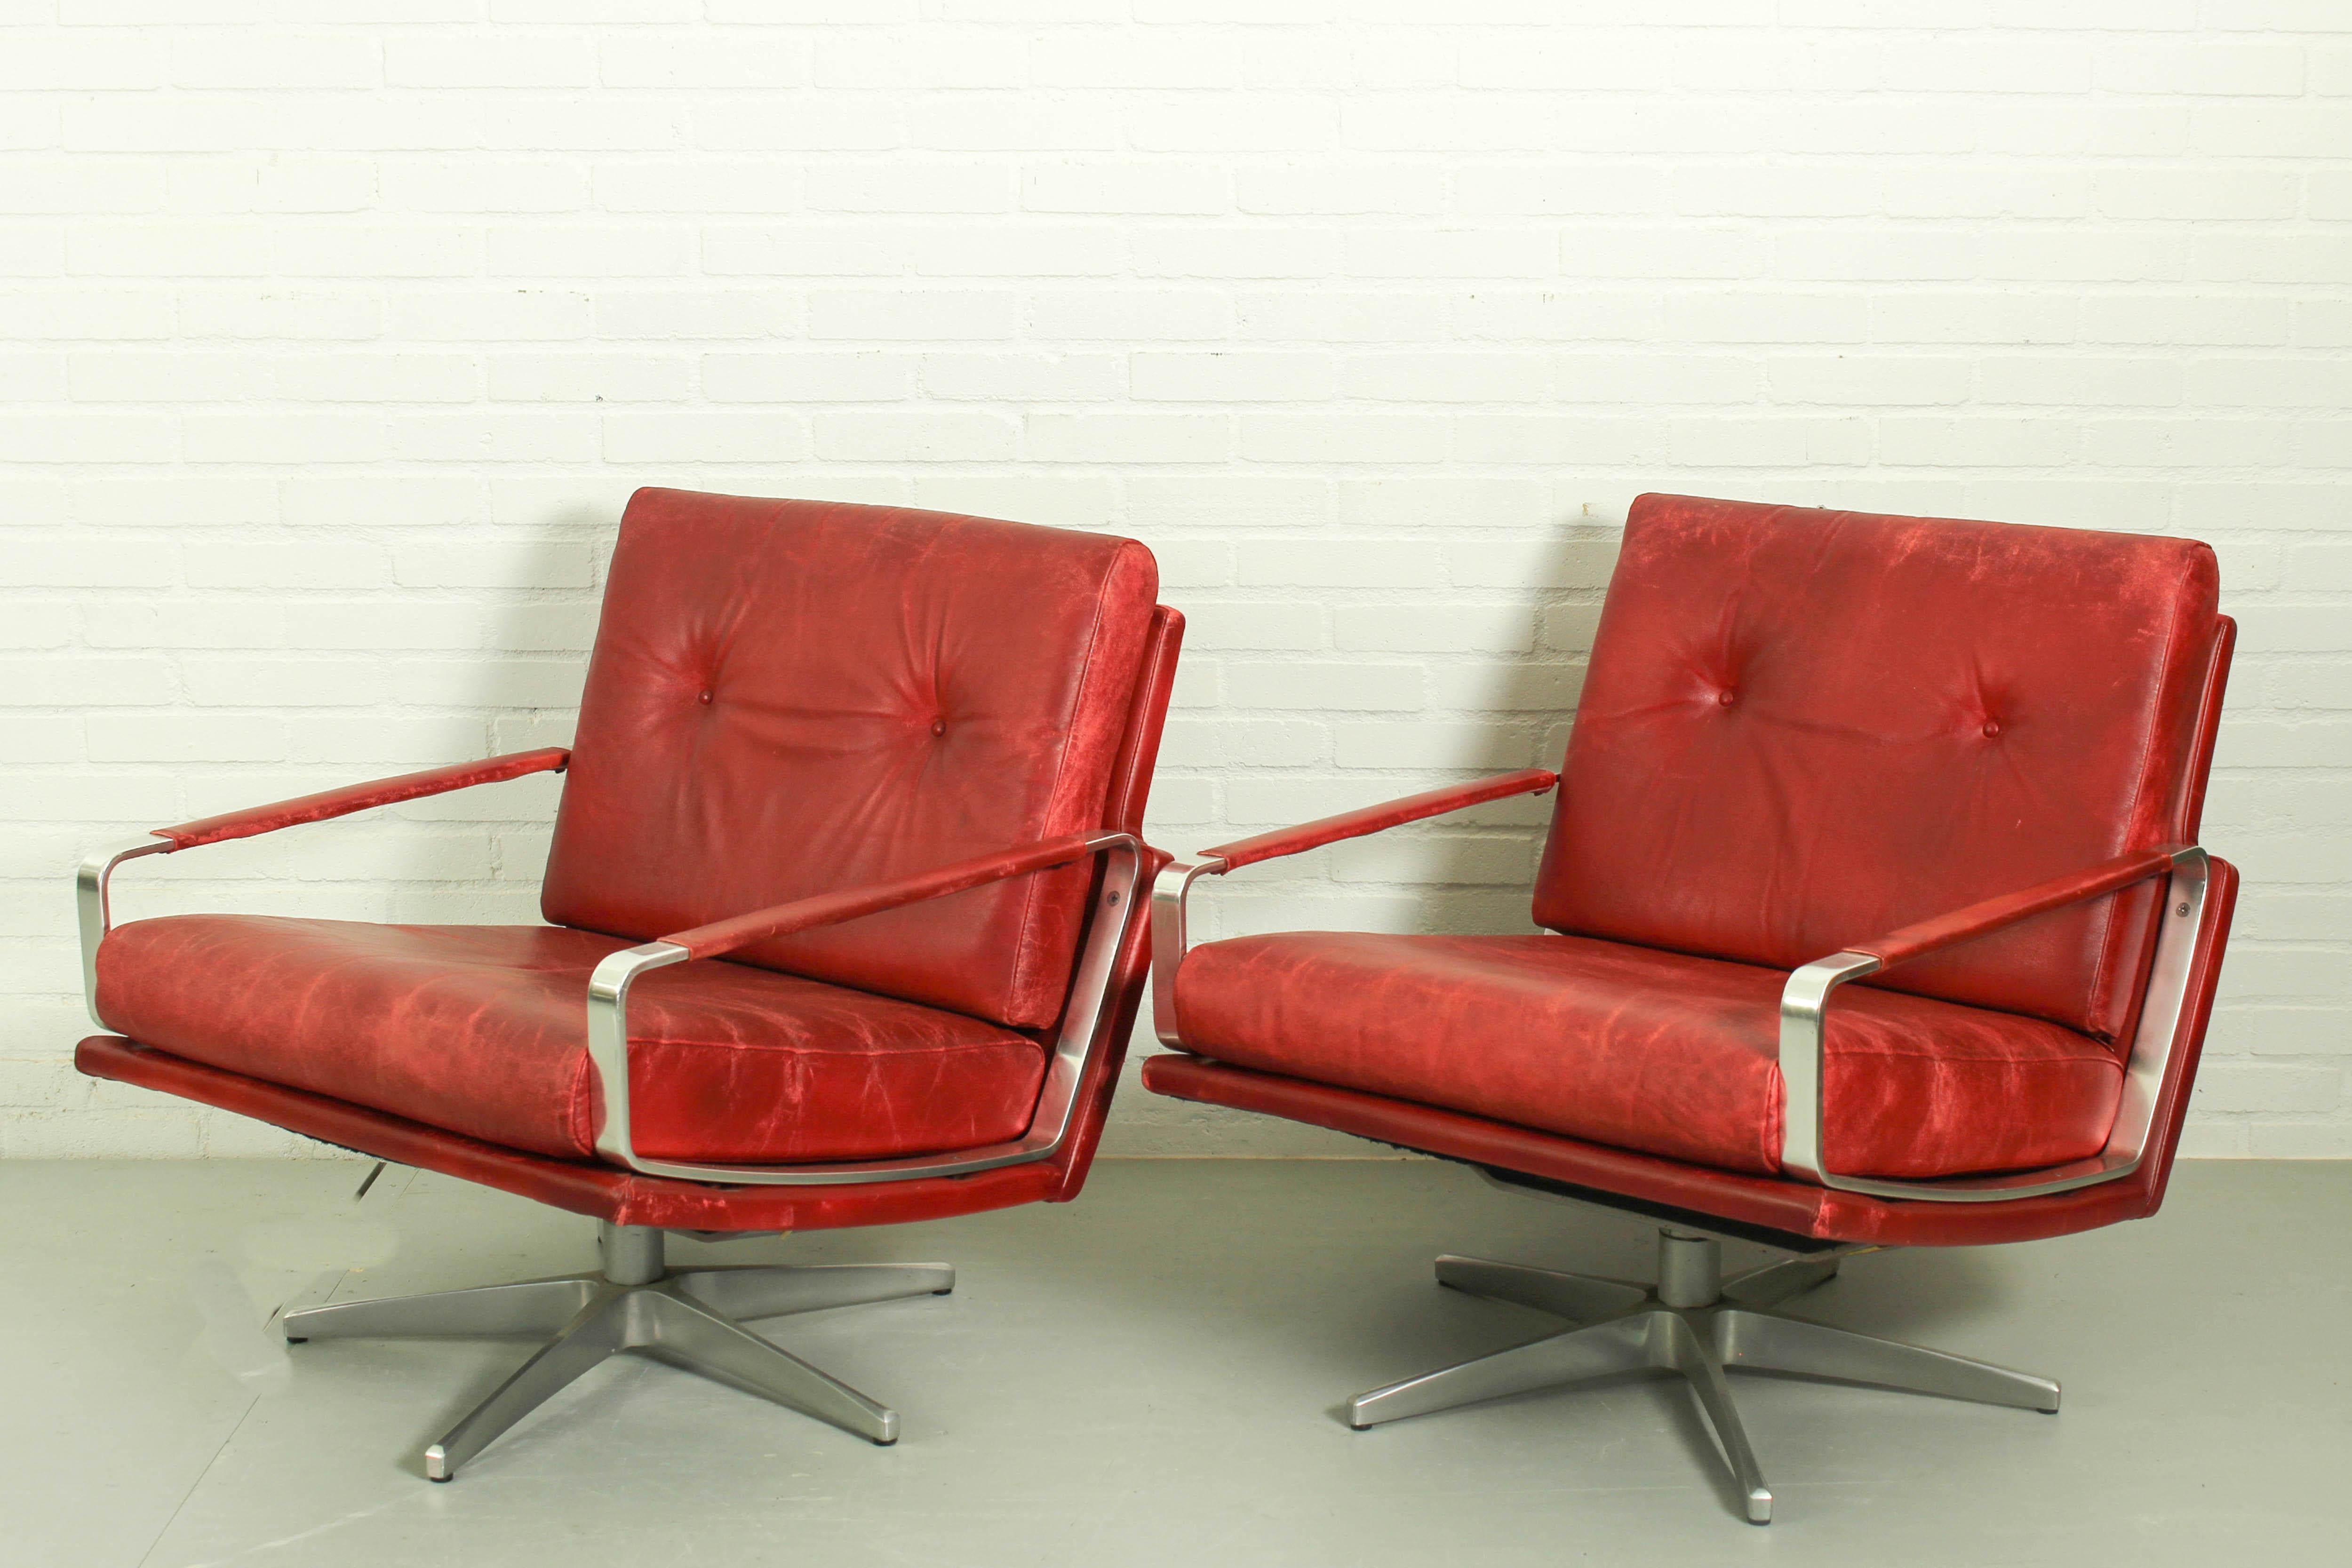 A beautiful pair of very stylish German 1960s swivel lounge chairs. The chairs are upholstered in a genuine rich dark red coloured Leather, with two removable cushions. The pieces feature a sleek low back, typical of sixties design. The chair is